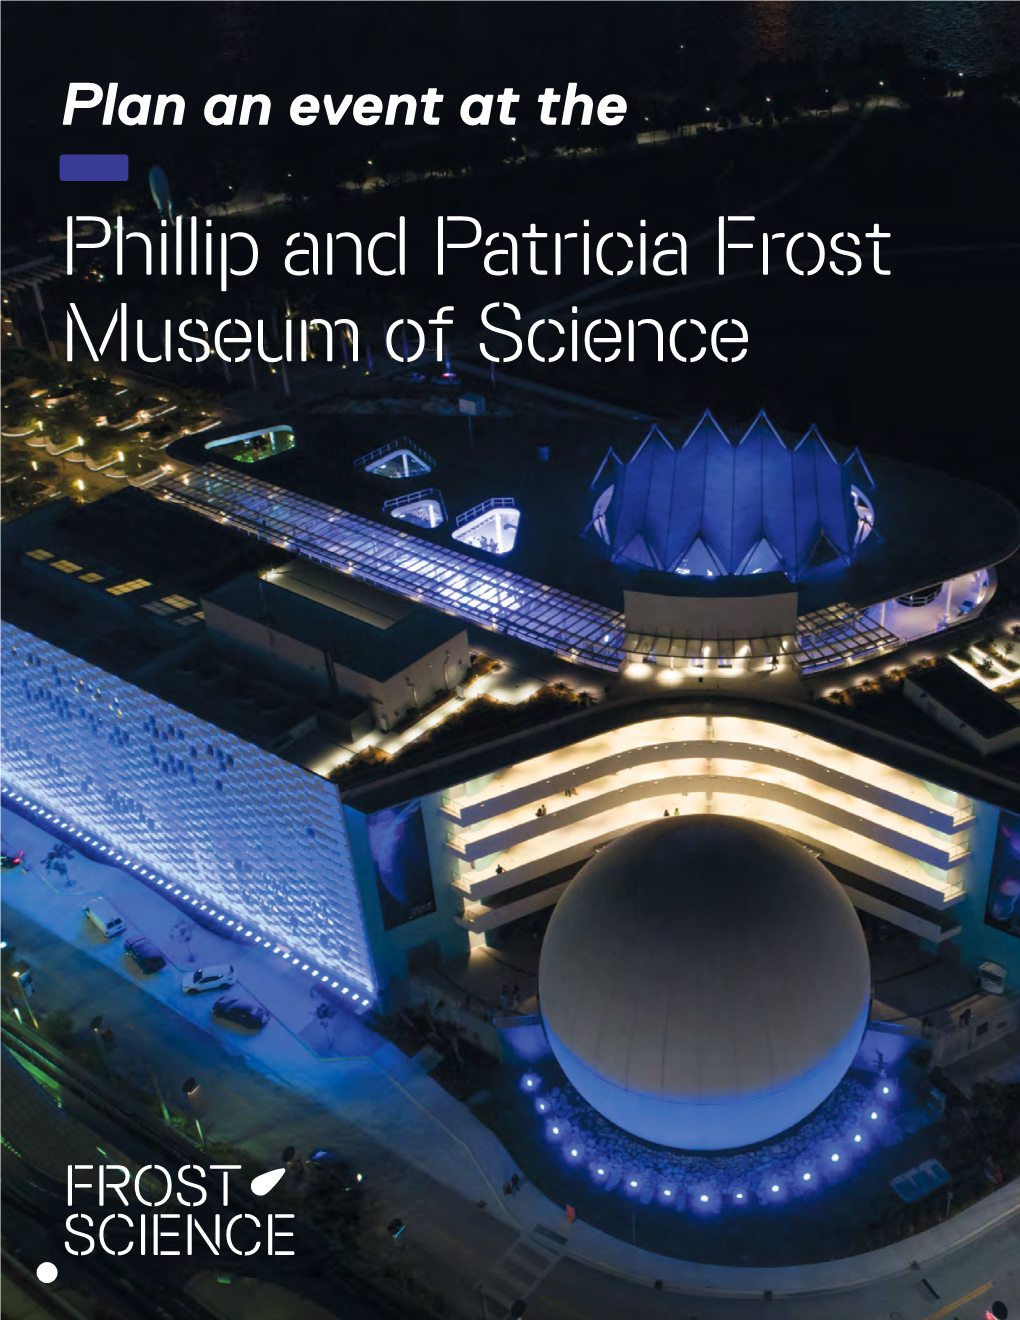 Phillip and Patricia Frost Museum of Science -We Have Events Down to a Science!